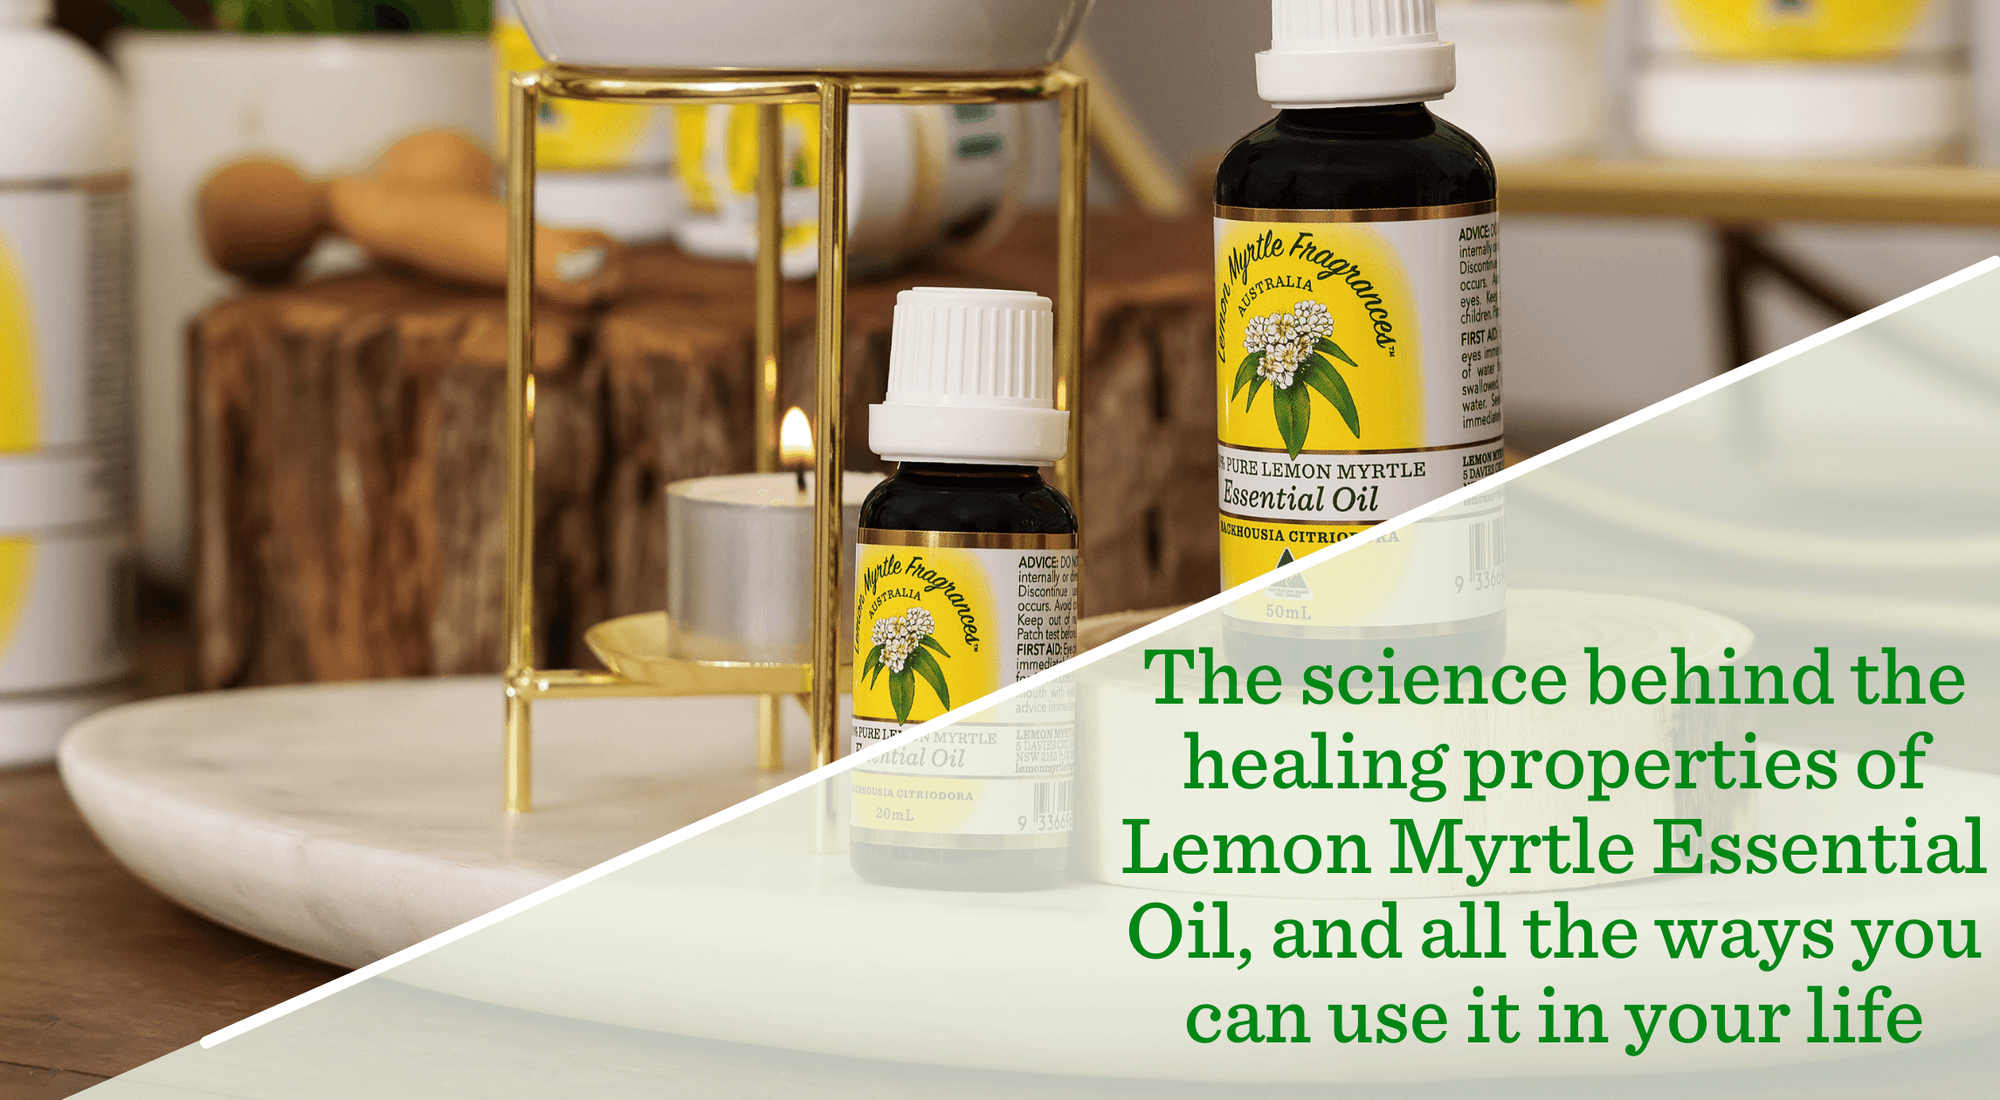 The science behind the healing properties of Lemon Myrtle Essential Oil, and all the ways you can use it in your life